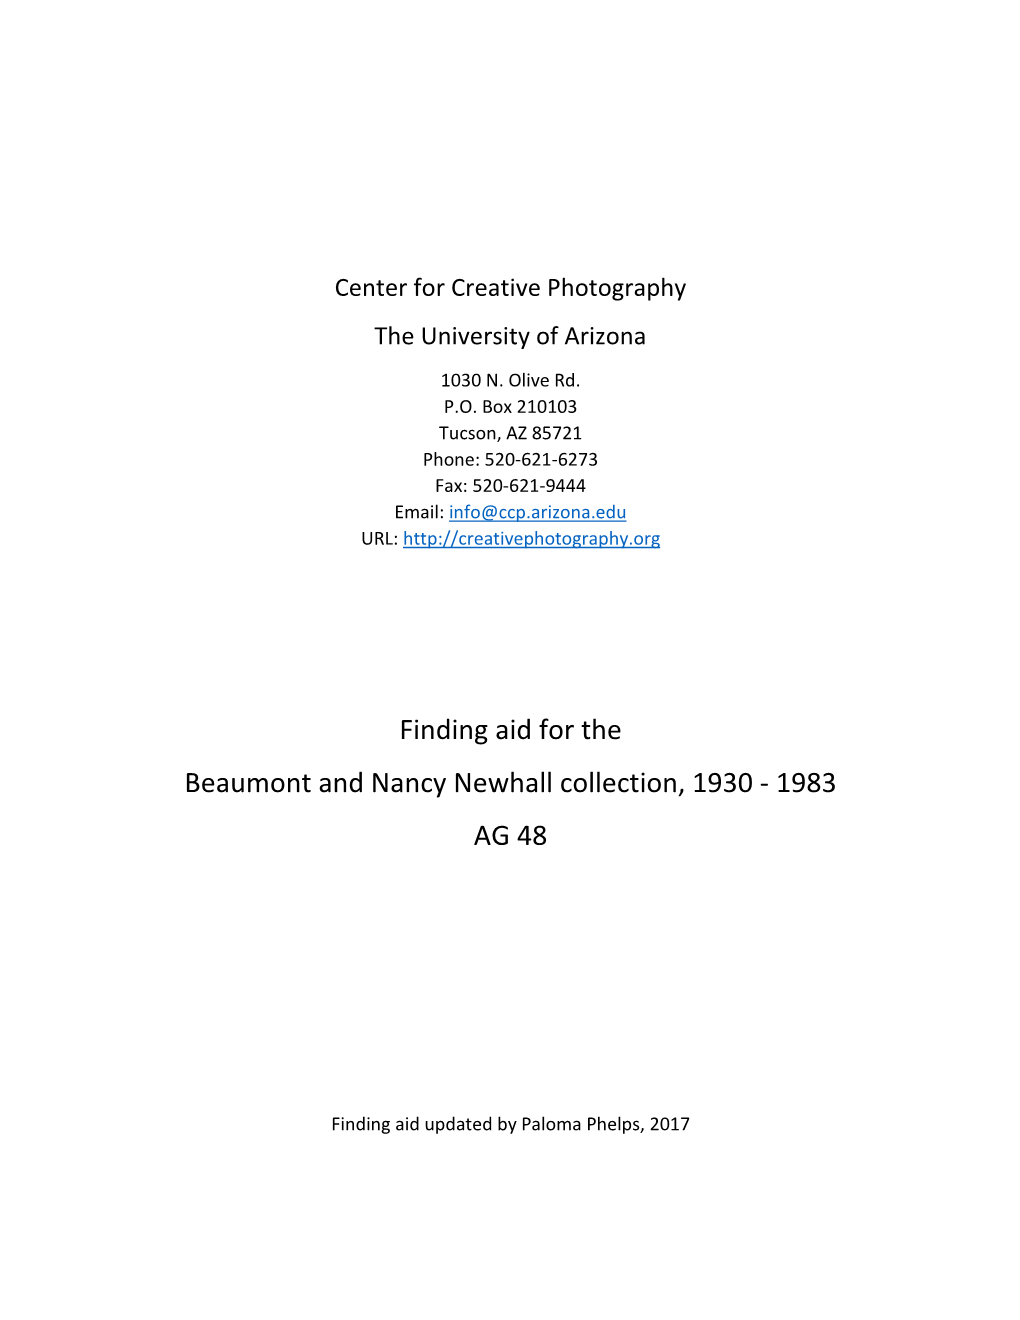 Finding Aid for the Beaumont and Nancy Newhall Collection, 1930 - 1983 AG 48